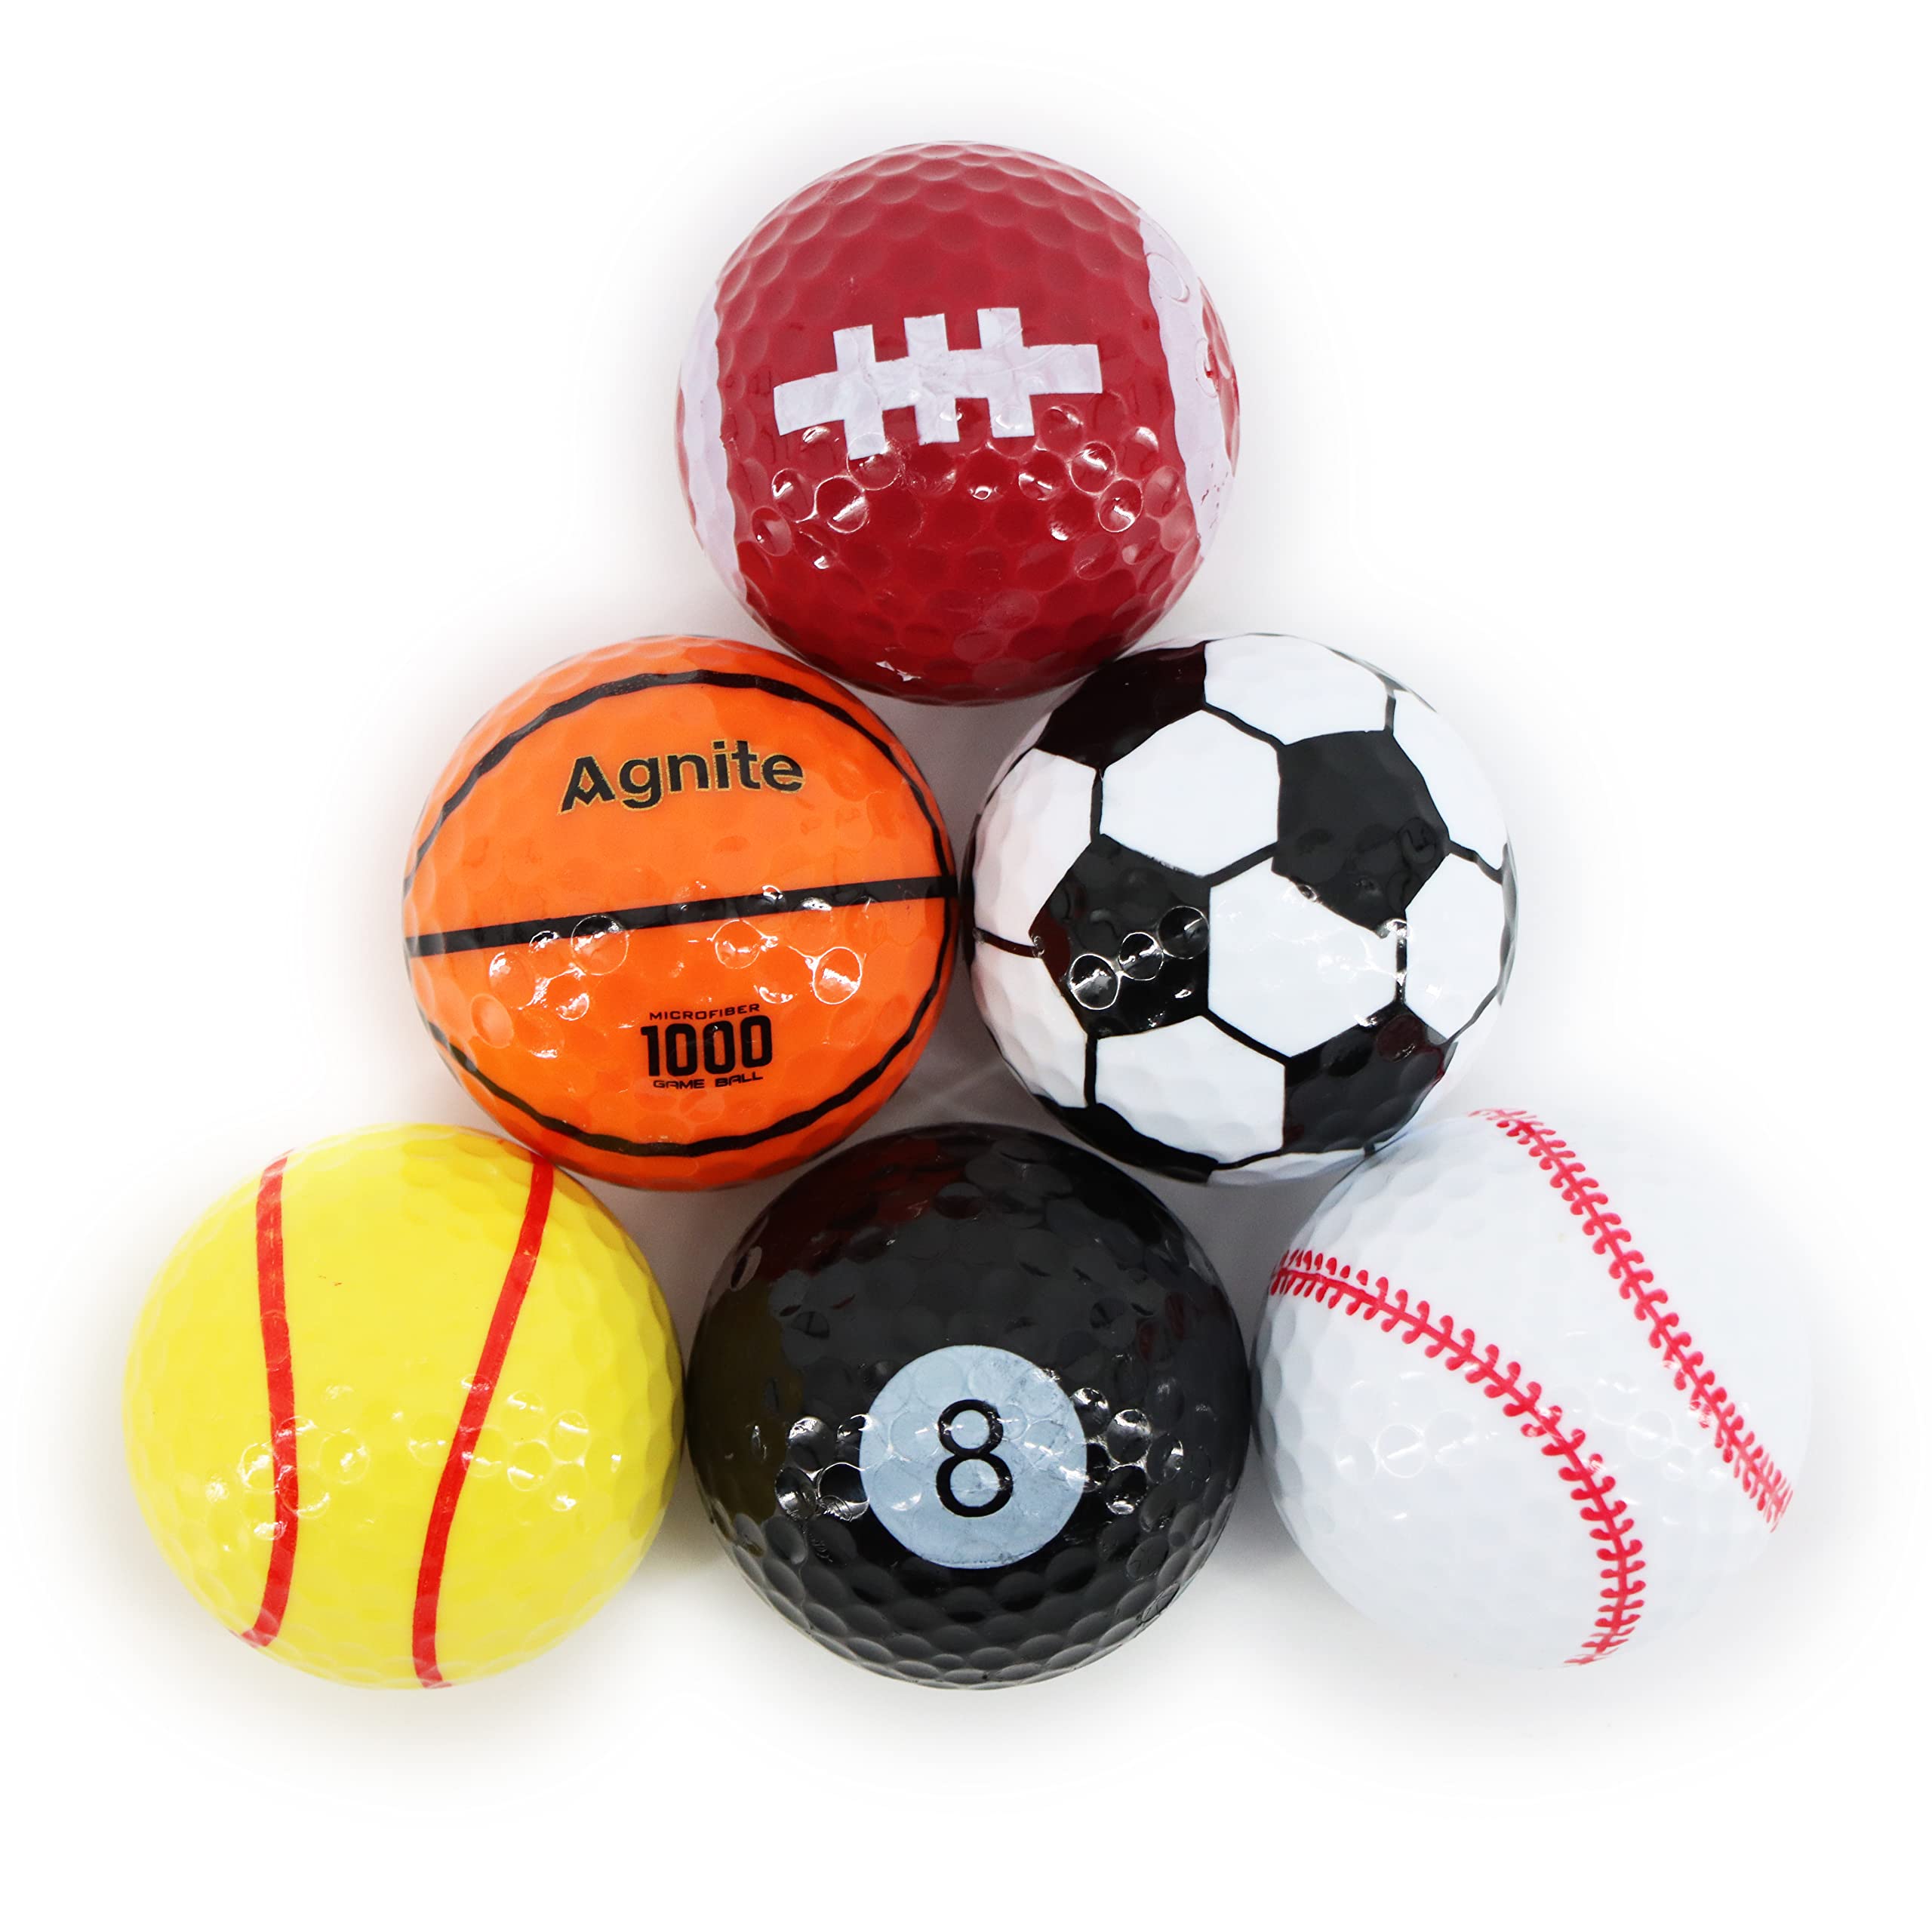 Funny Novelty Golf Balls 6Pack Golfer Novelty Golf Gift for All Golfers Fun Golf  Gifts for